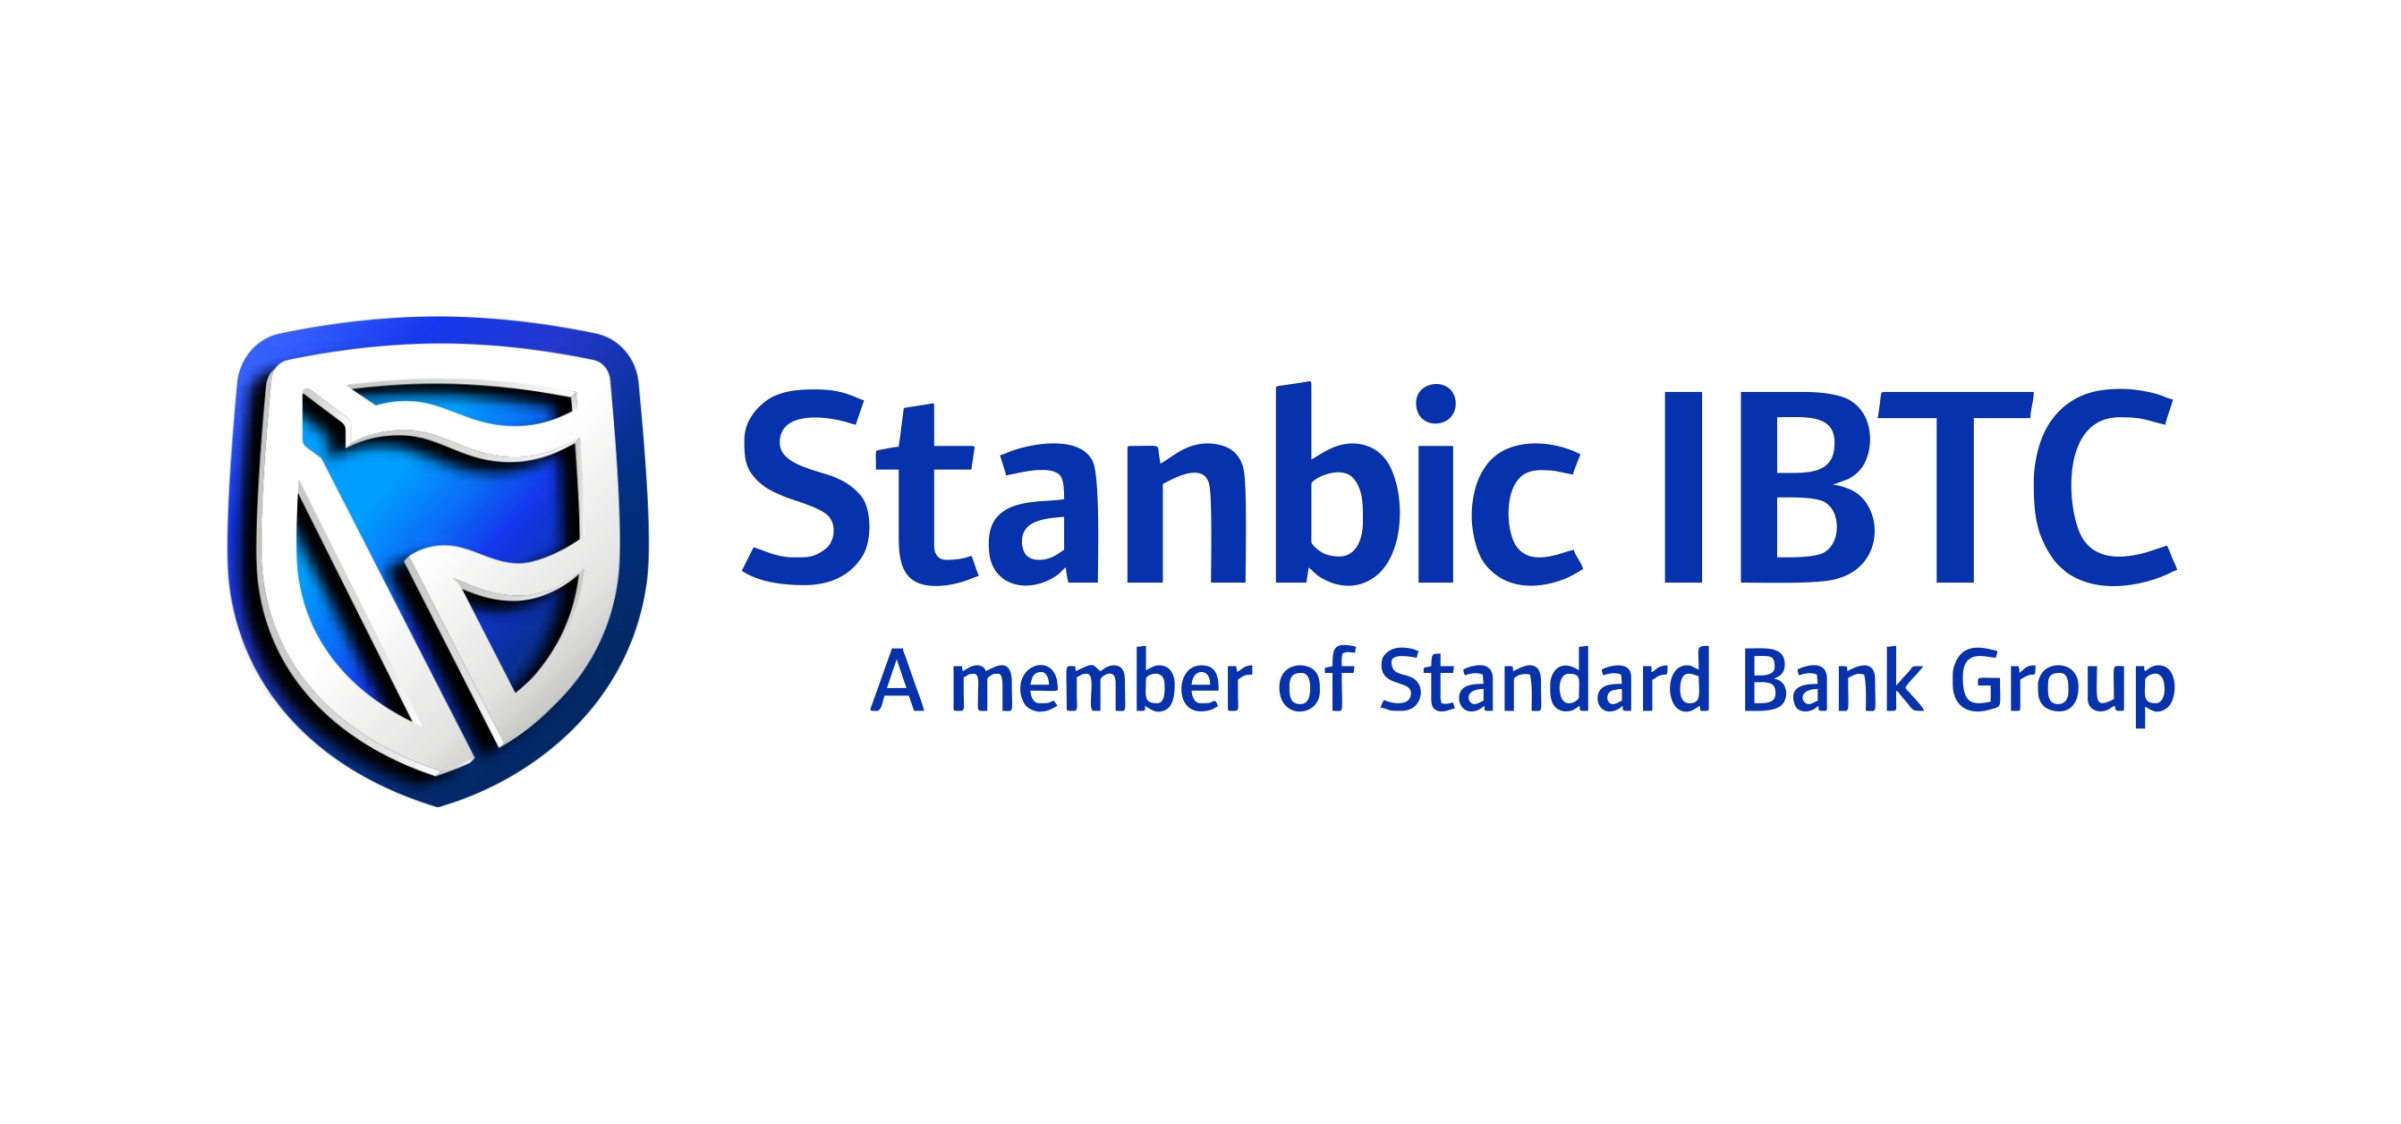 Stanbic IBTC Showcases Strong CSI Through Together4ALimb Initiative, Others-marketingspace.com.ng